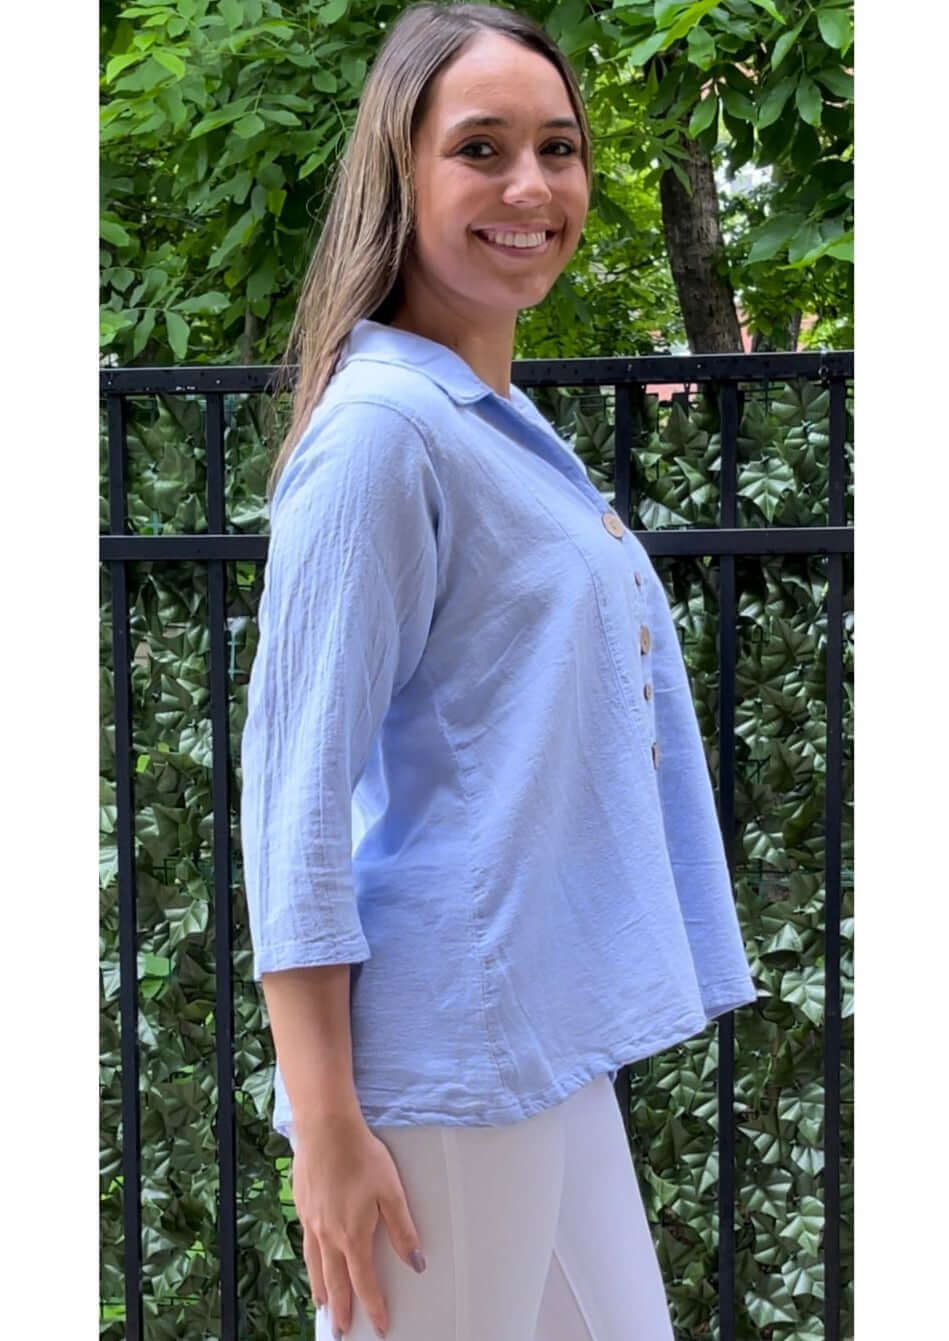 Made in USA Classy Women's 100% USA Cotton Button Down Ladies Top with Alternating Button Sizes in Serenity Blue | Classy Cozy Cool Women's Made in America Boutique